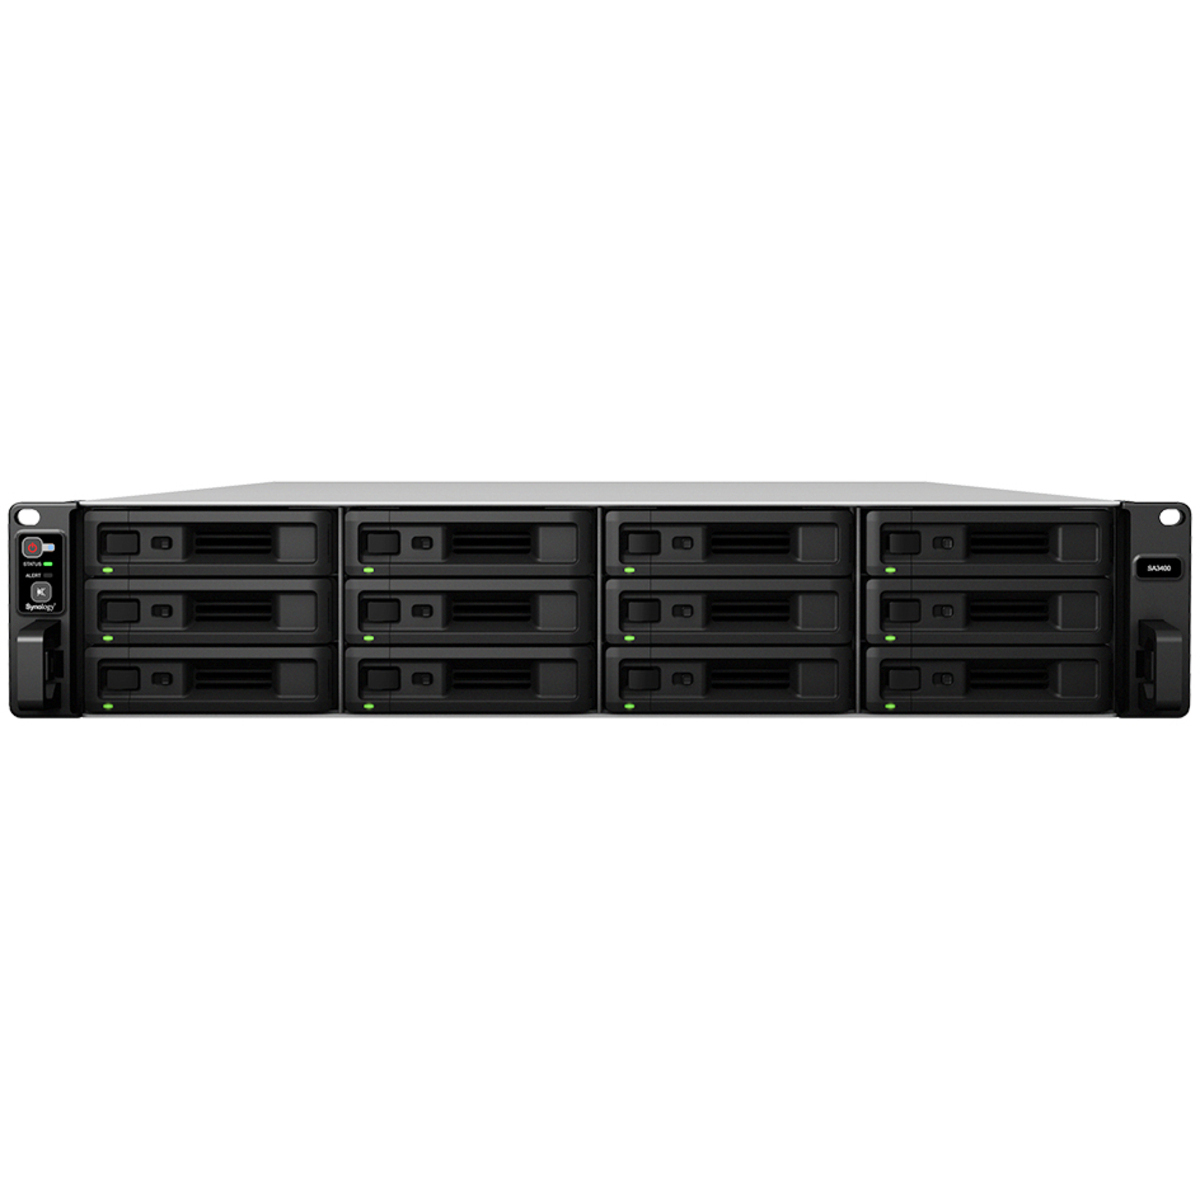 buy $18518 Synology RackStation SA3400 96tb RackMount NAS - Network Attached Storage Device 12x8000gb Samsung 870 QVO MZ-77Q8T0 2.5 SATA 6Gb/s SSD CONSUMER Class Drives Installed - Burn-In Tested - nas headquarters buy network attached storage server device das new raid-5 free shipping usa christmas new year holiday sale RackStation SA3400